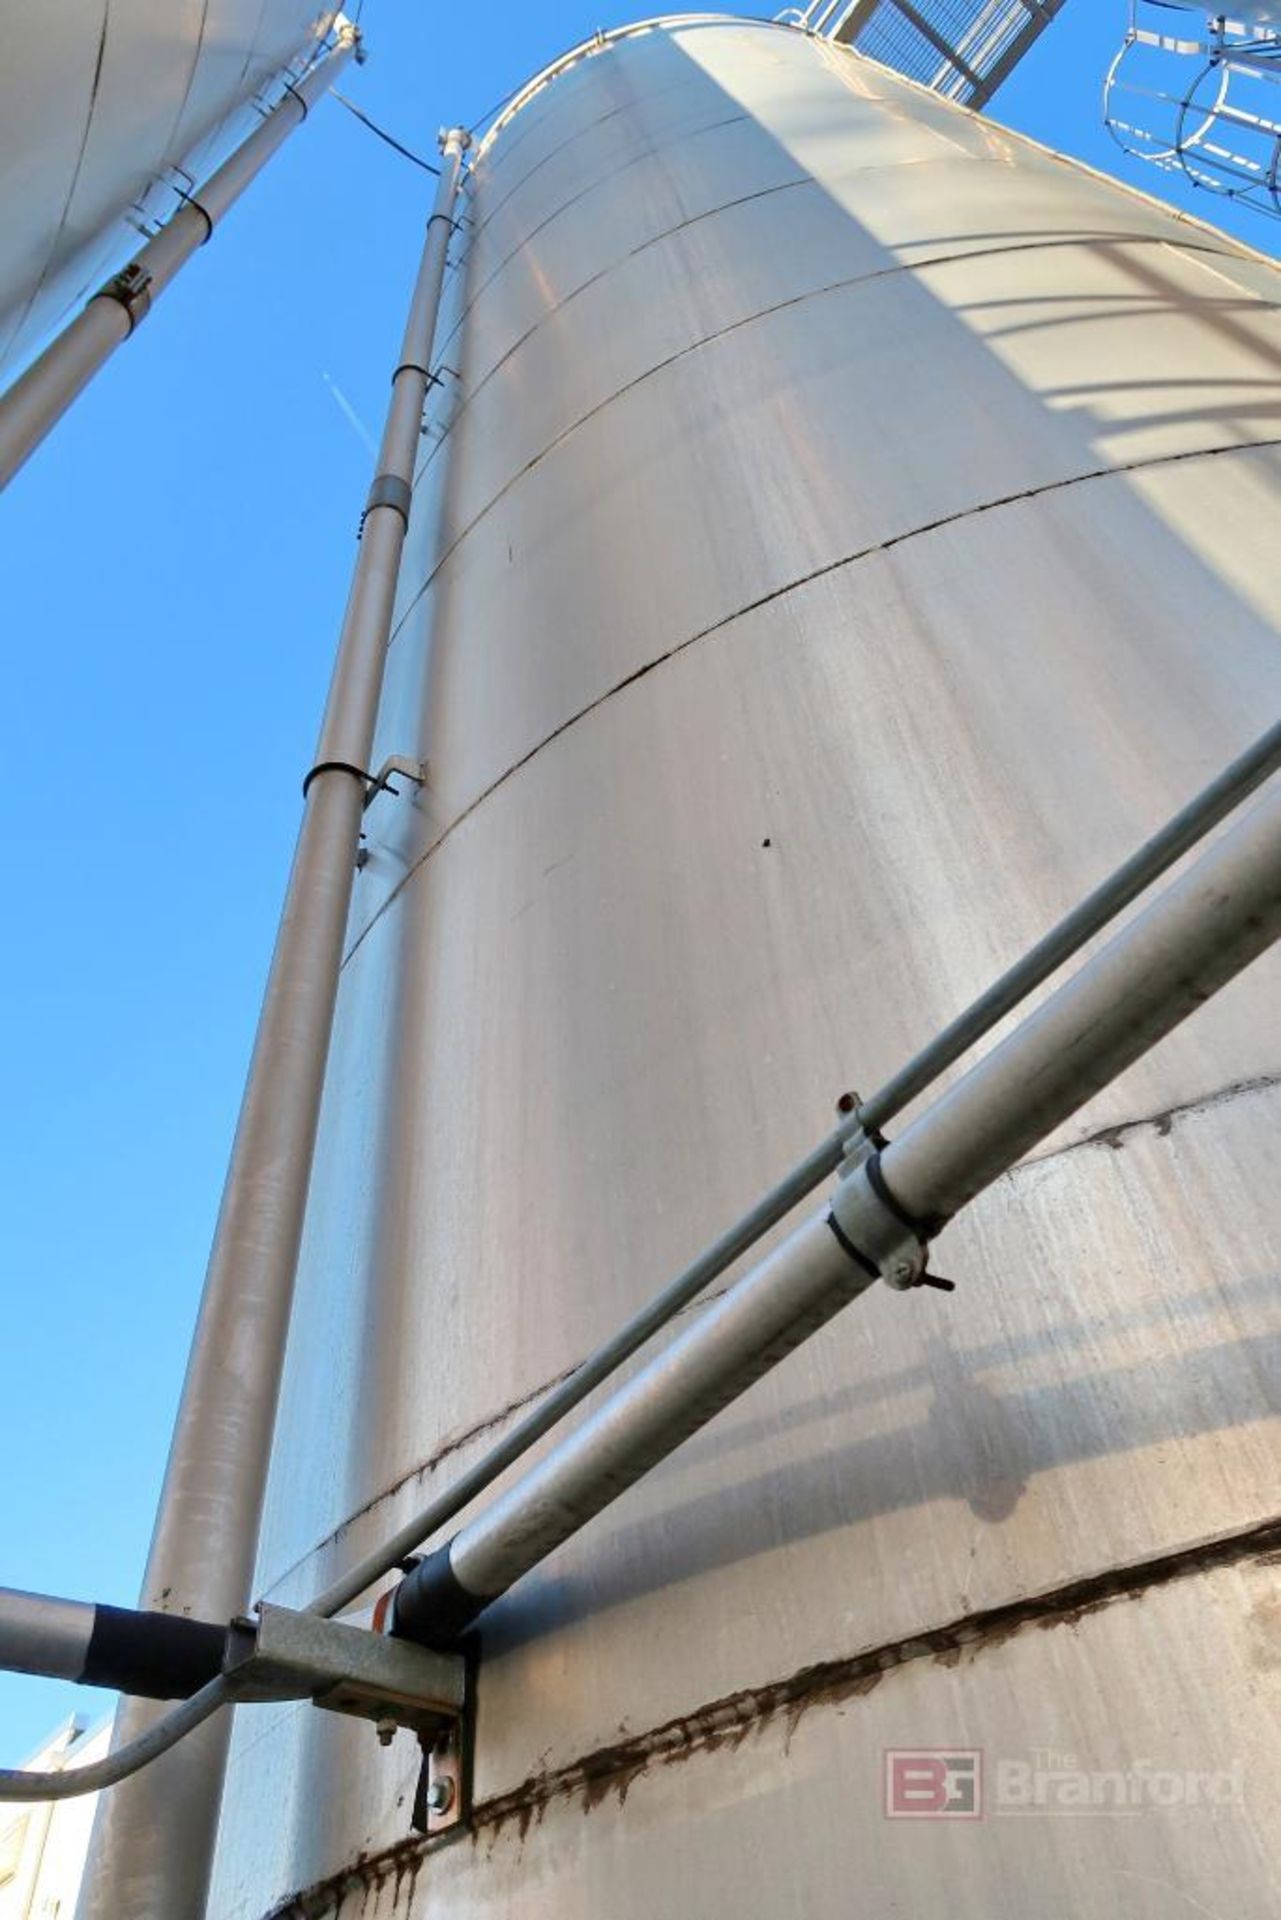 Material Storage Silo 125,000-Lb Resin Capacity - Image 5 of 5